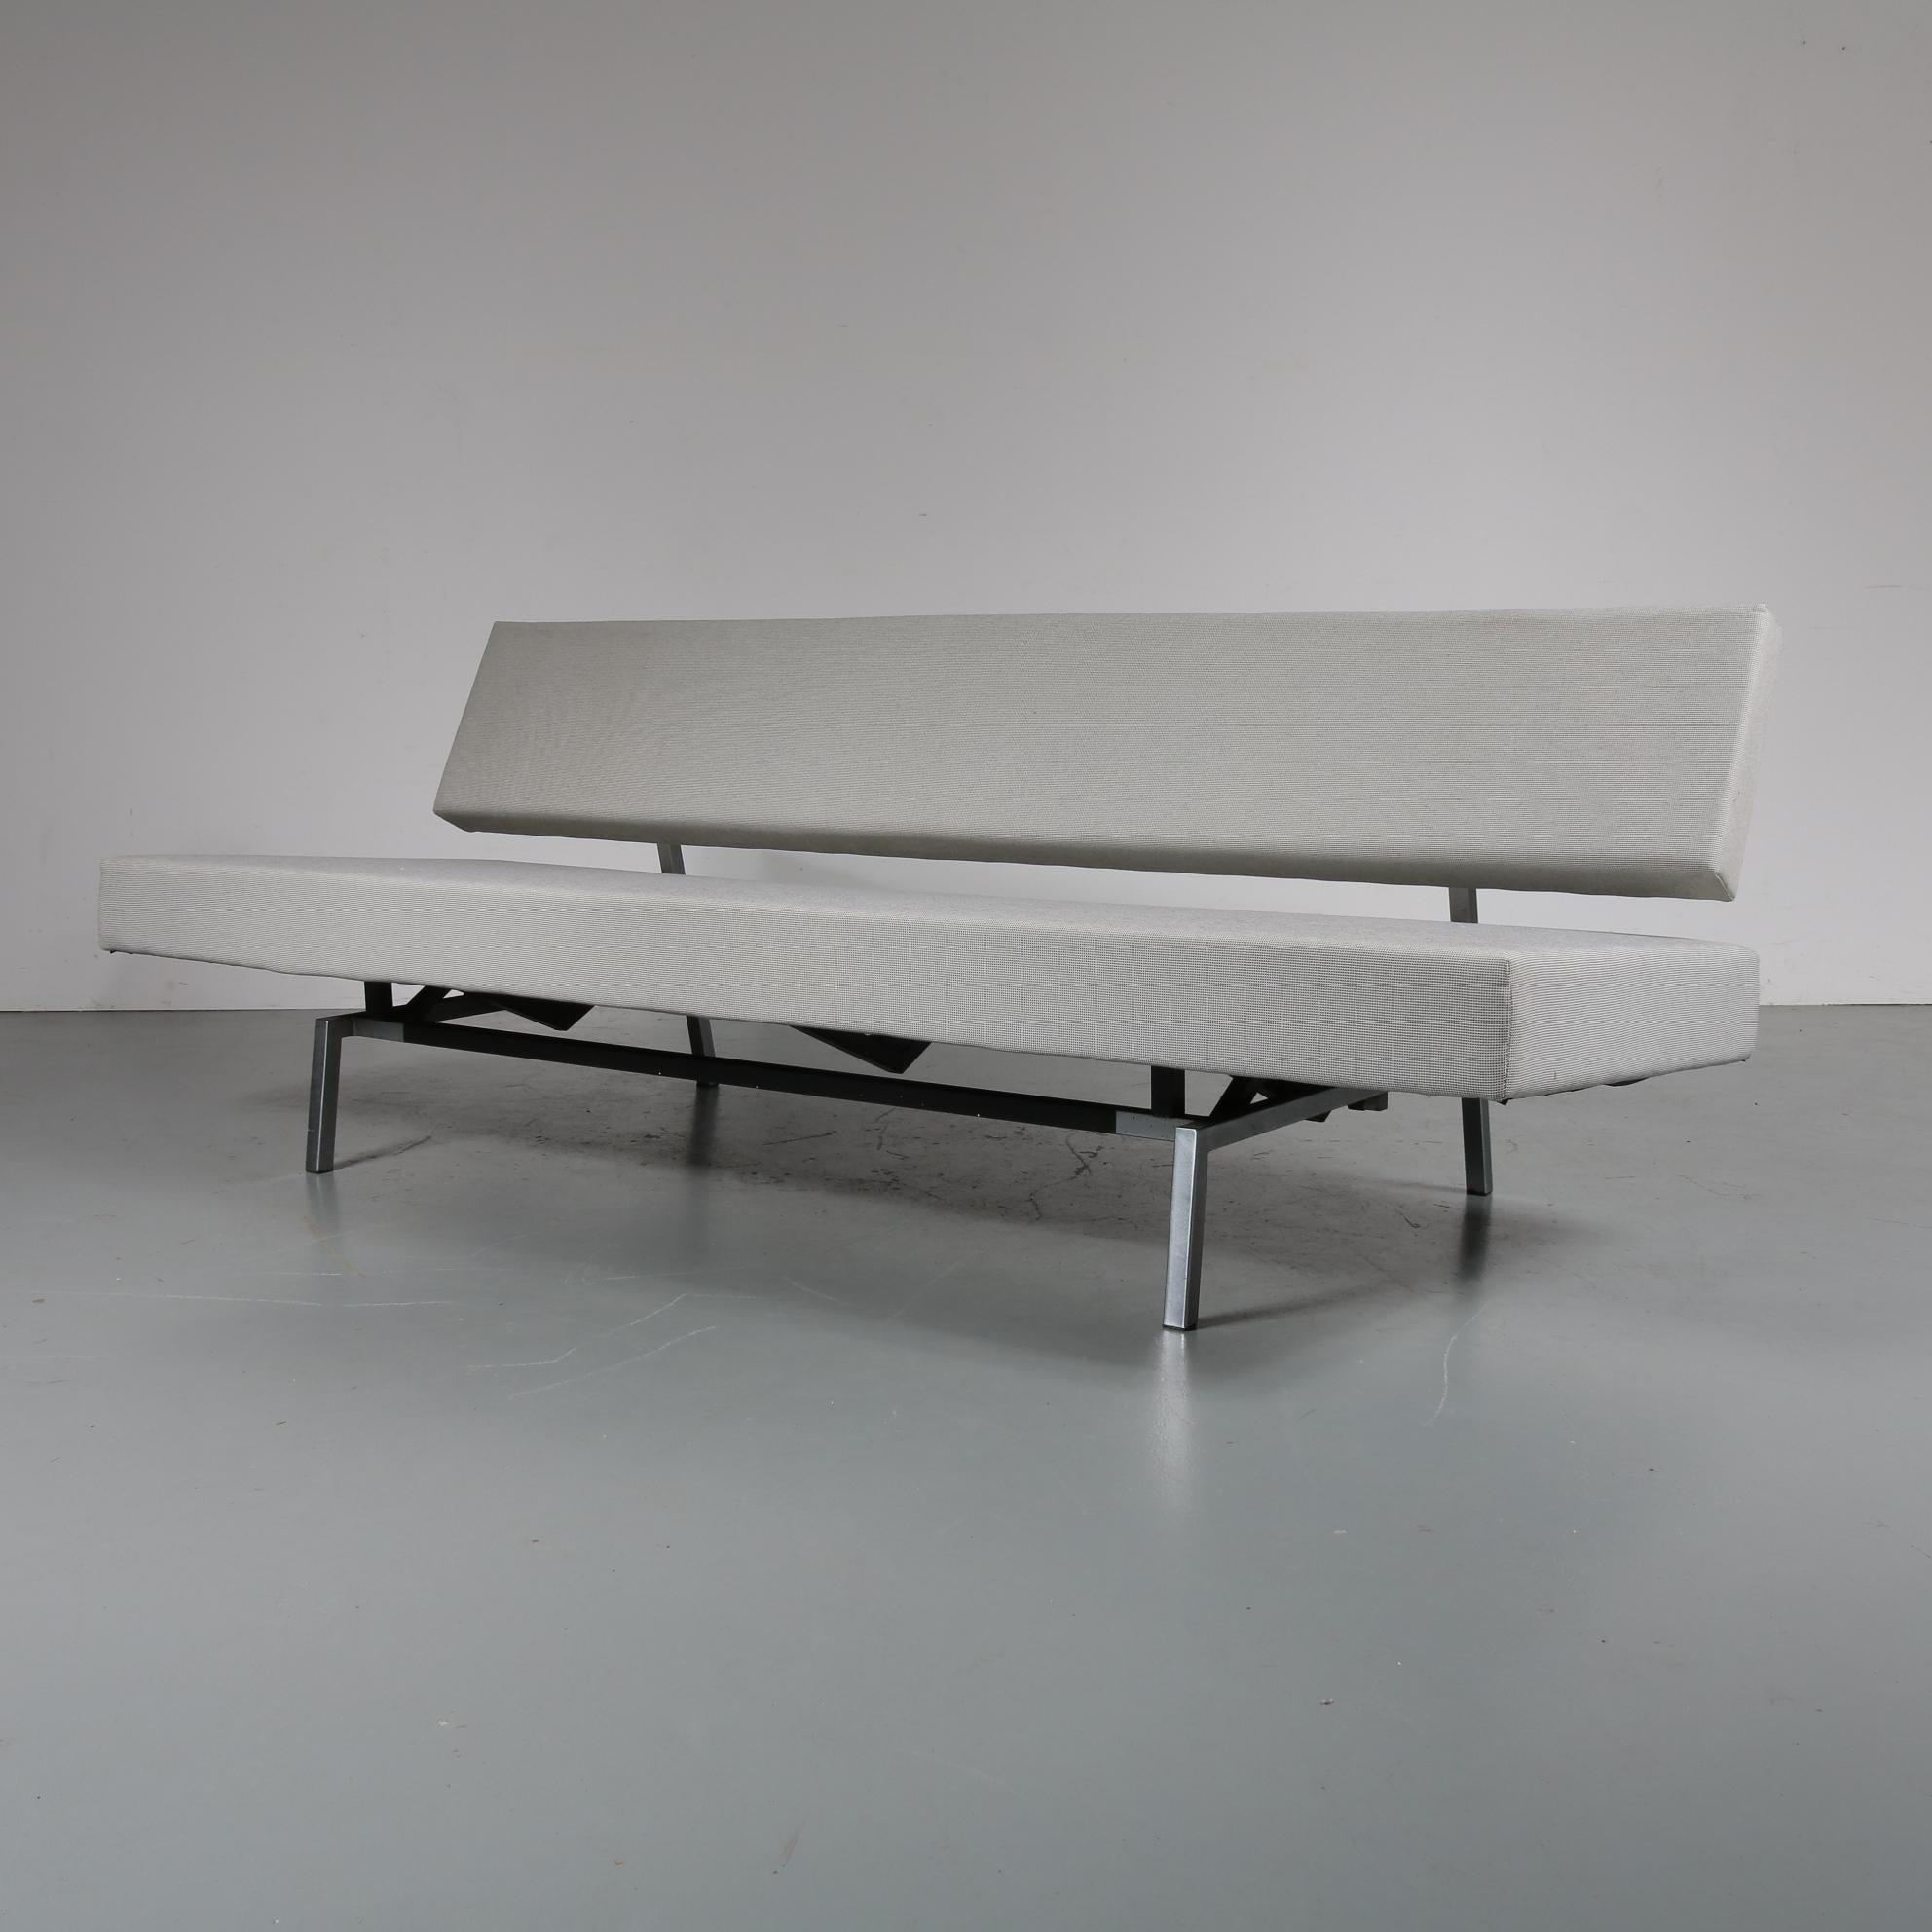 A beautiful sleeping sofa, designed by Martin Visser and manufactured by 't Spectrum in the Netherlands, circa 1960.

This is a unique piece in Dutch modern style. This iconic piece by famous designer Martin Visser is made of high quality chrome